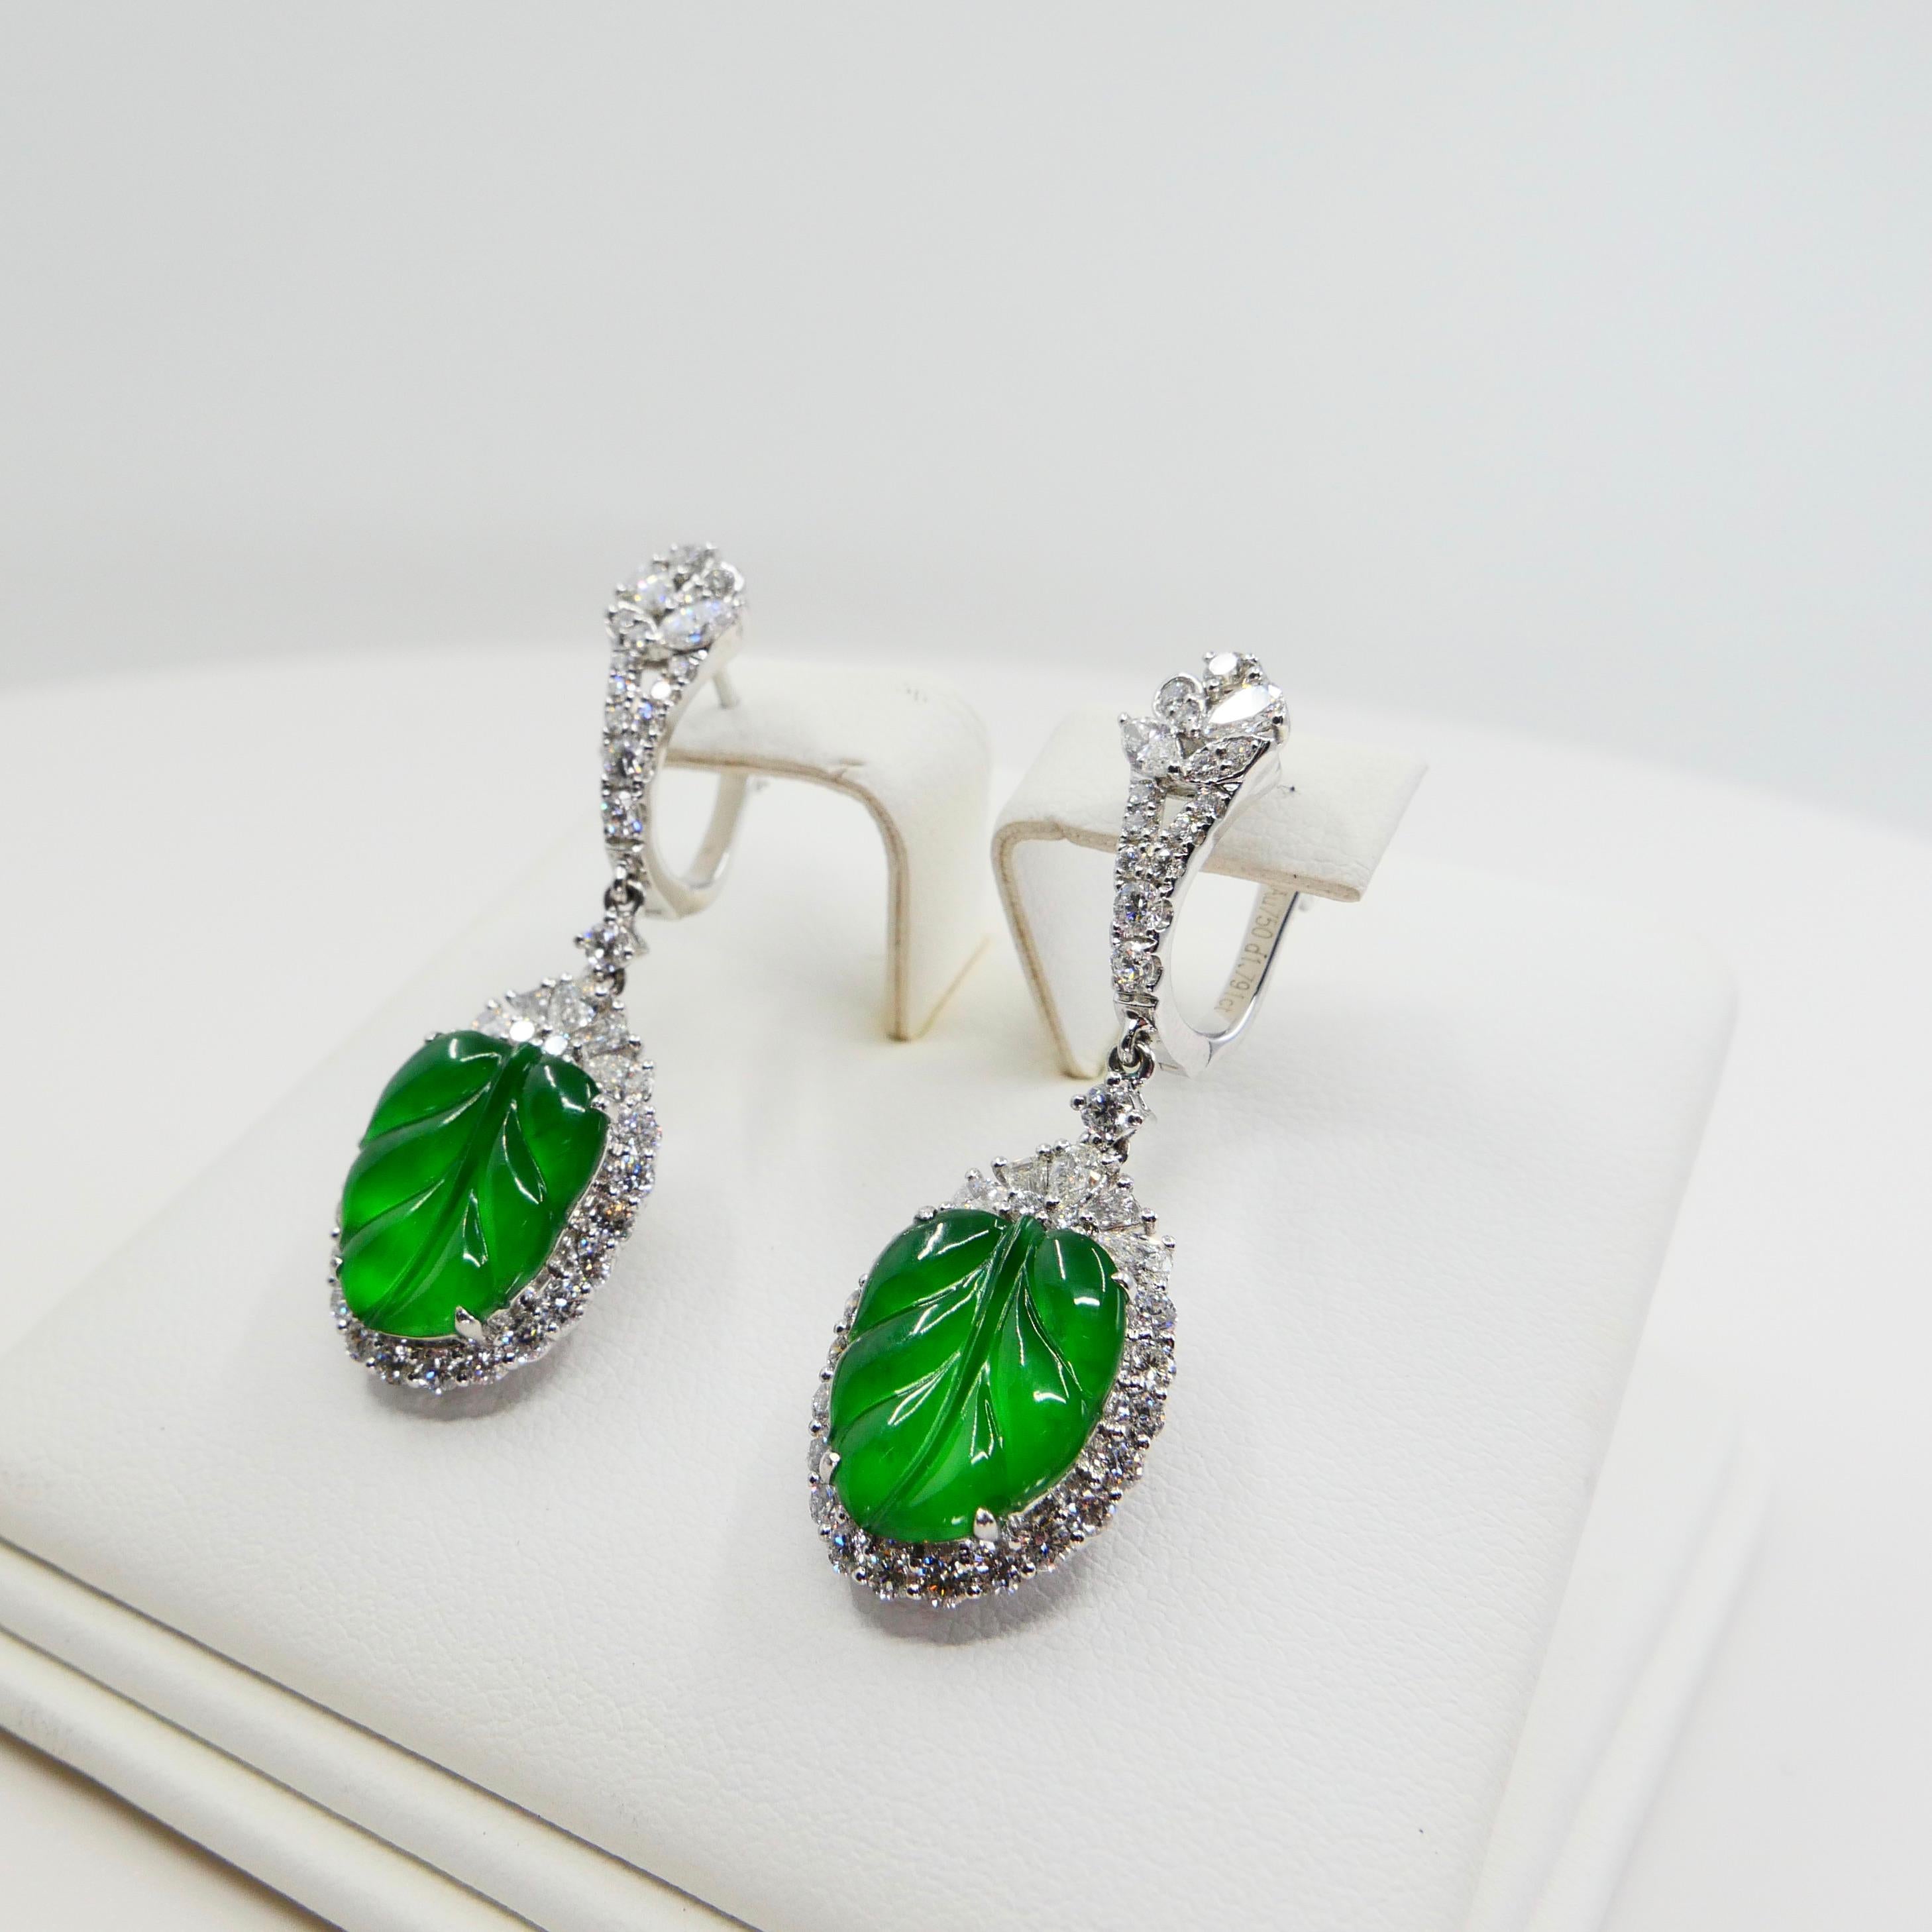 Certified Icy Apple Green Jade and Diamond Earrings, Almost Imperial Green 6